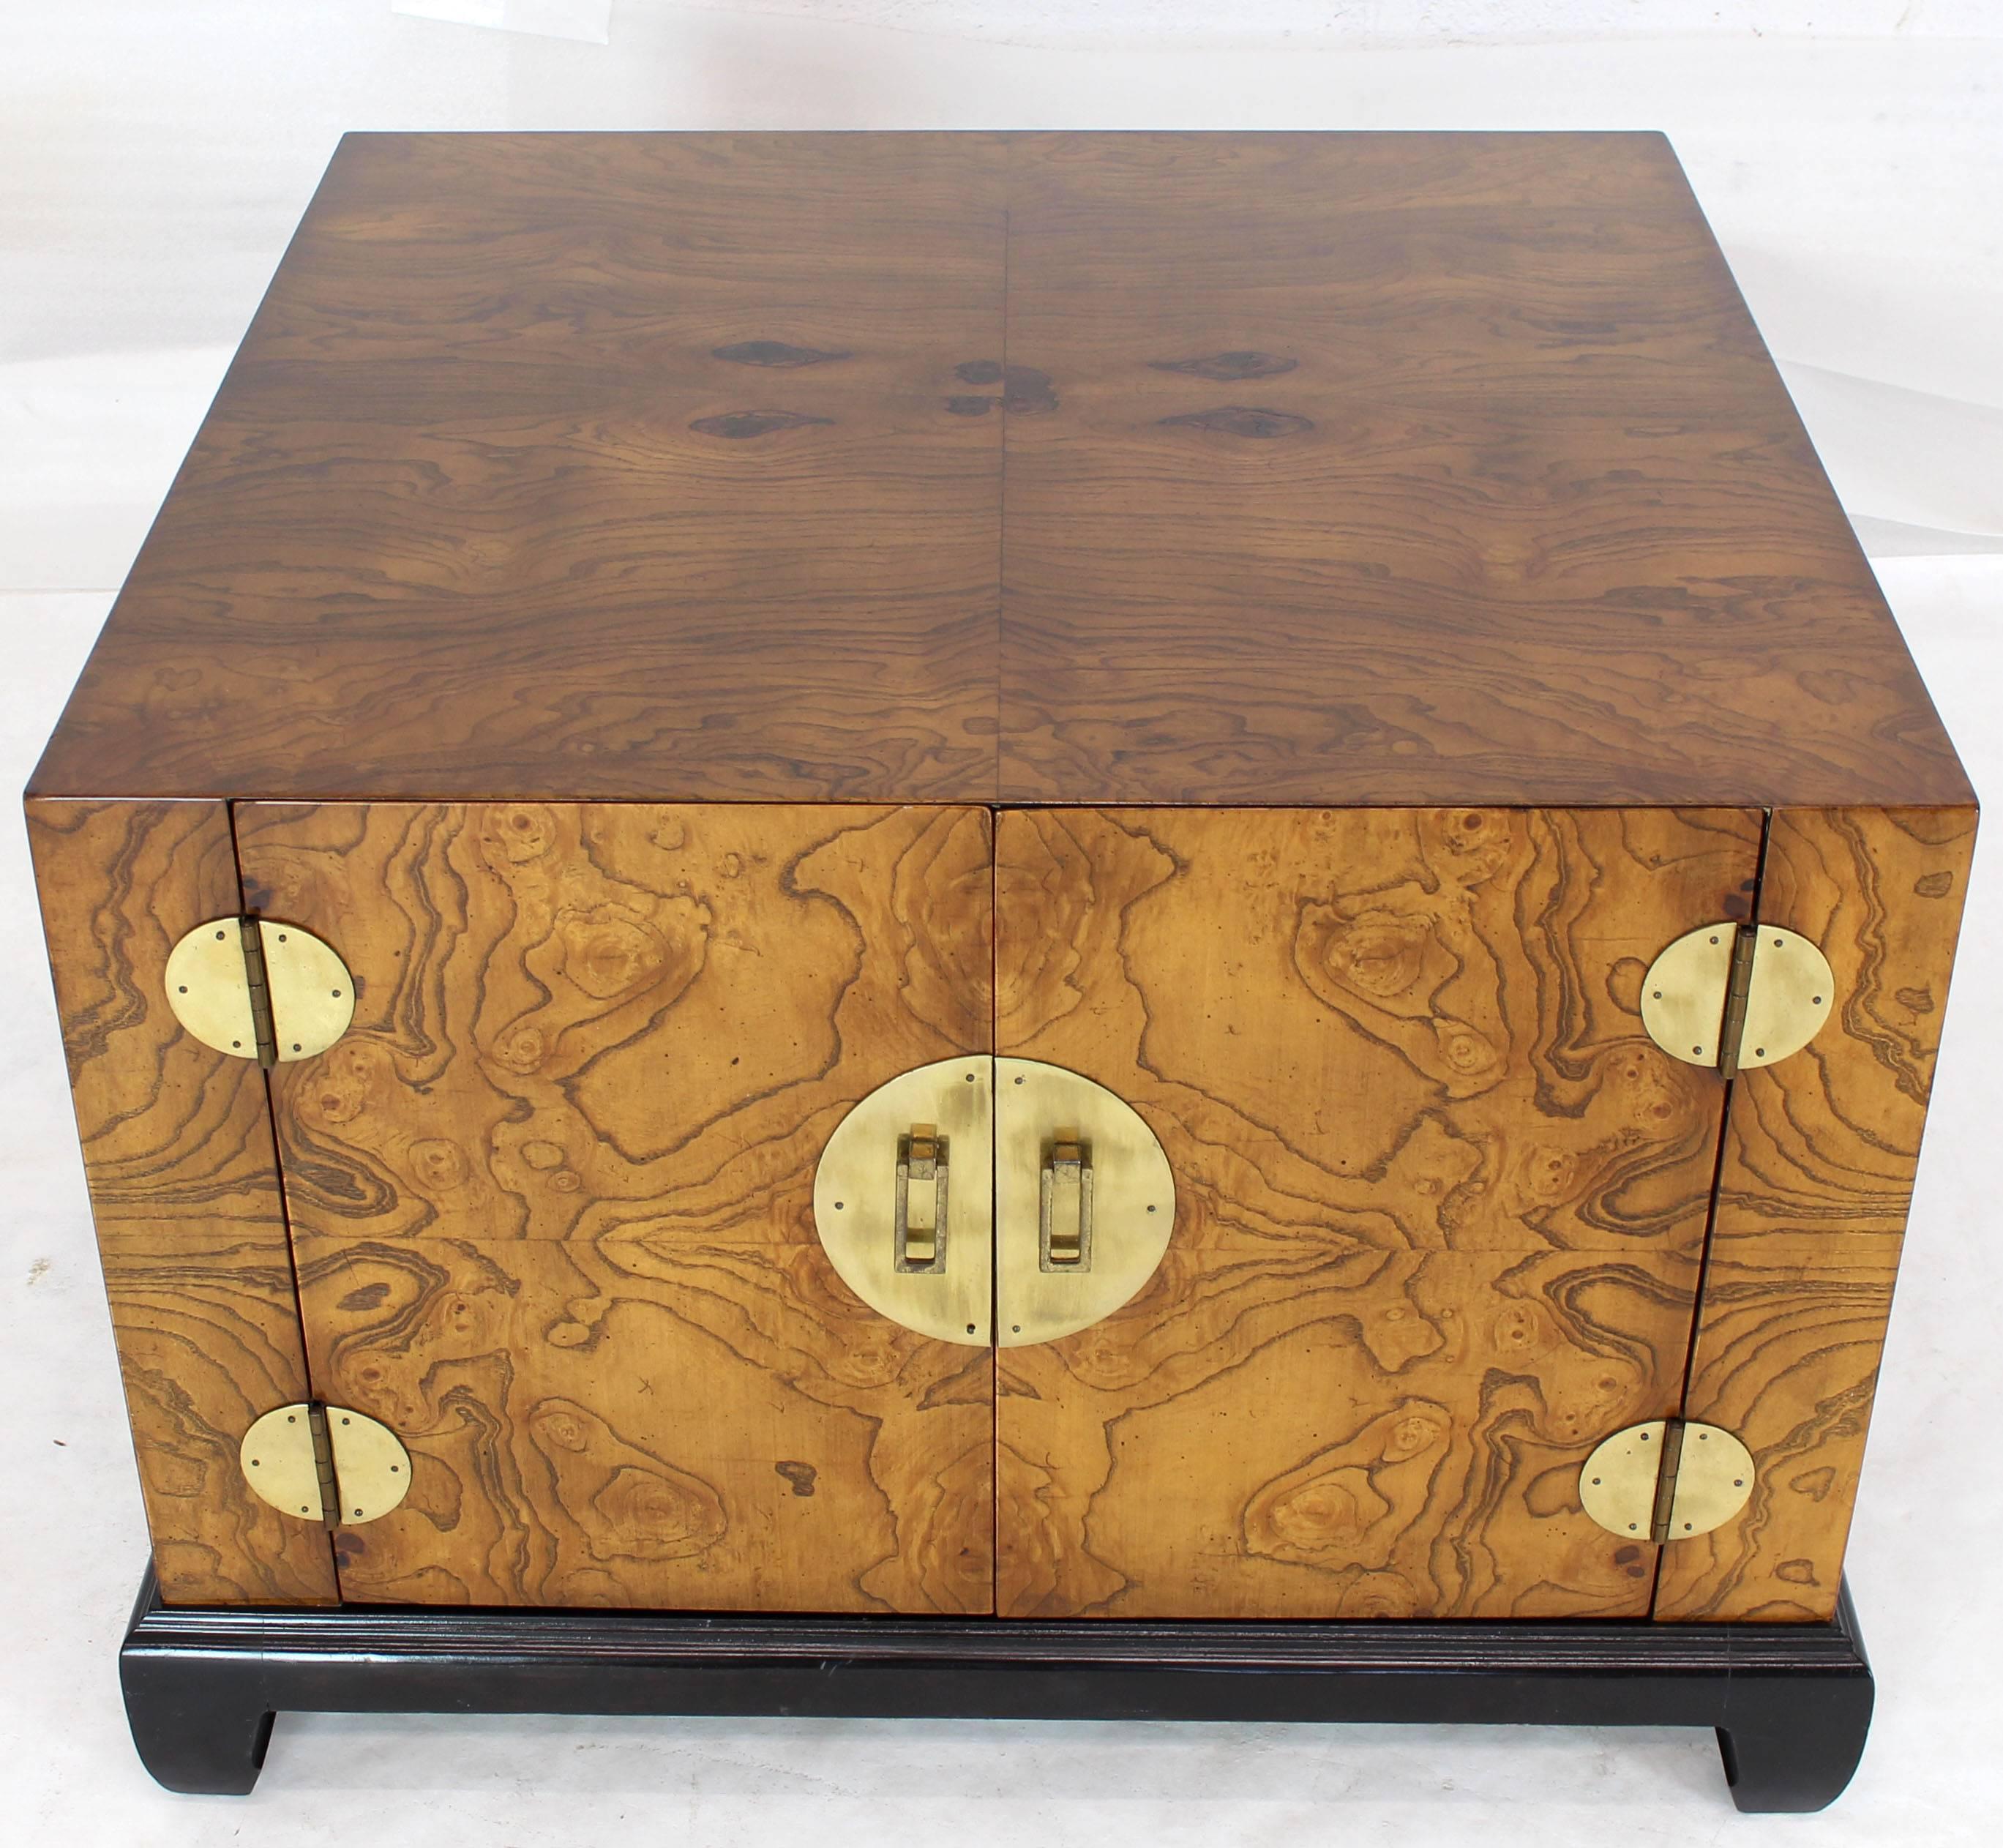 Blackened Burl Walnut Black Lacquer Base Brass Hardware Cube Shape End Table Stand Cabinet